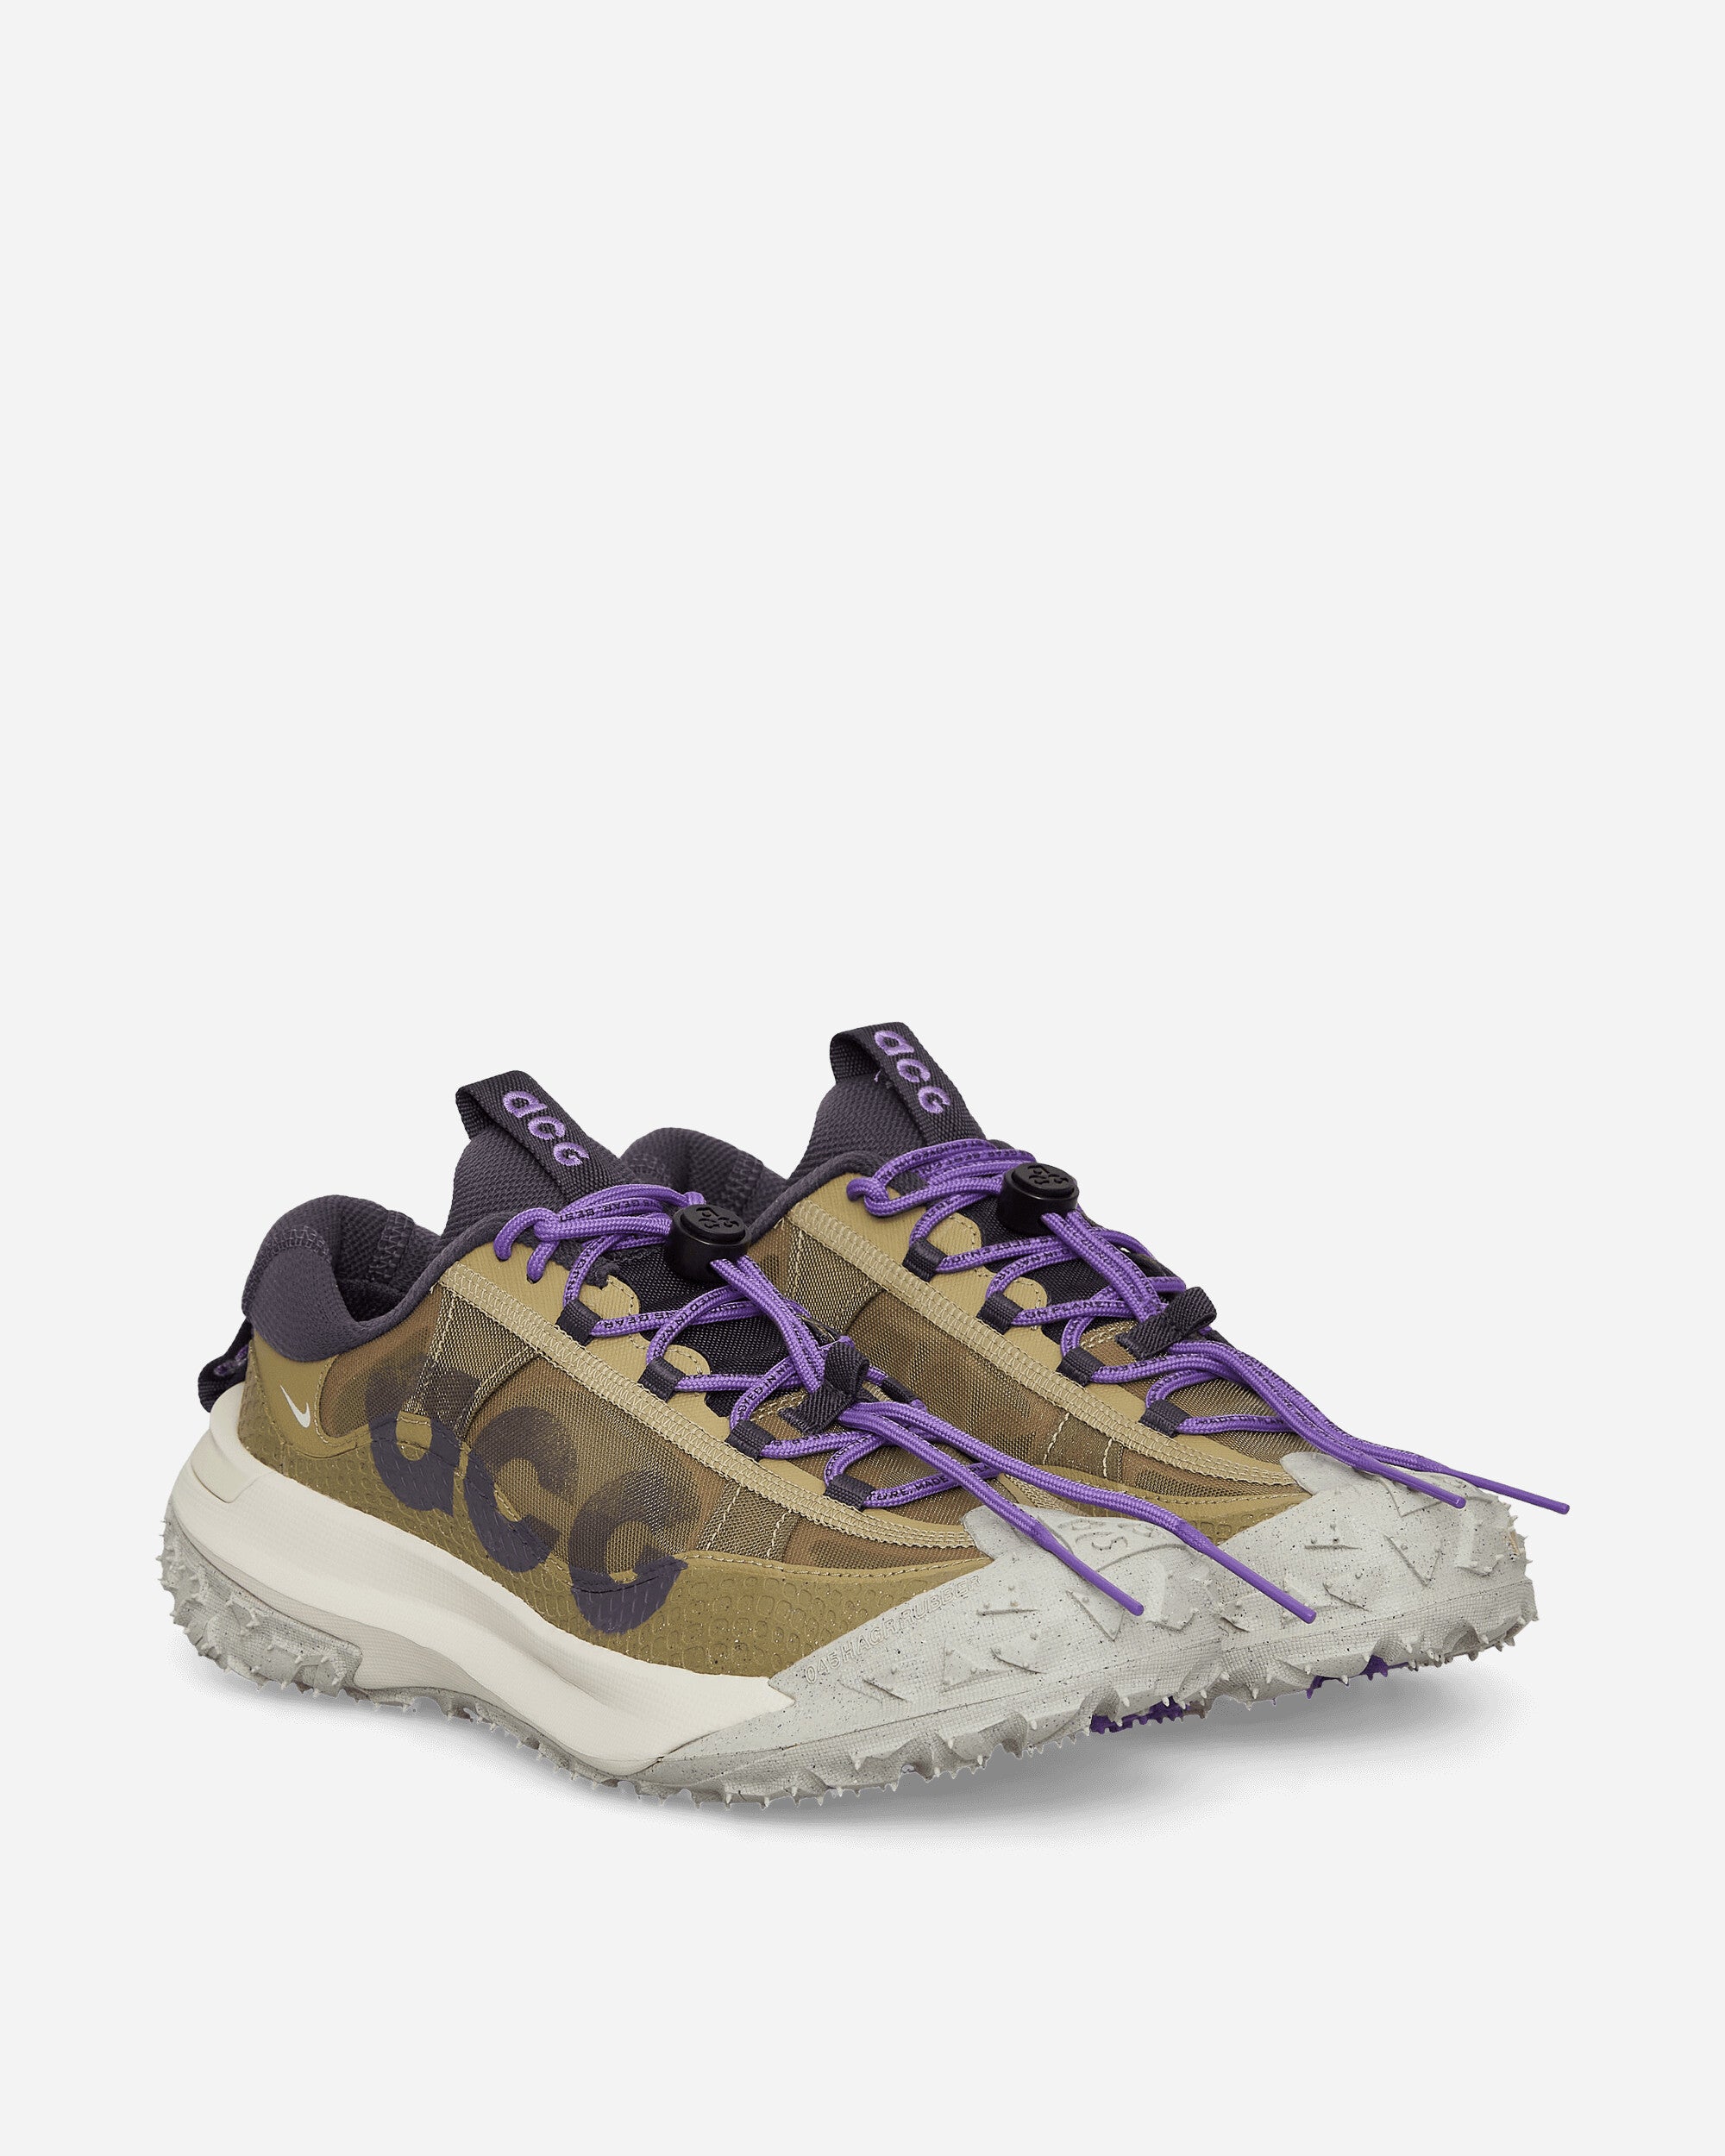 Nike ACG Mountain Fly 2 Low Sneakers Olive - Jam Official Store